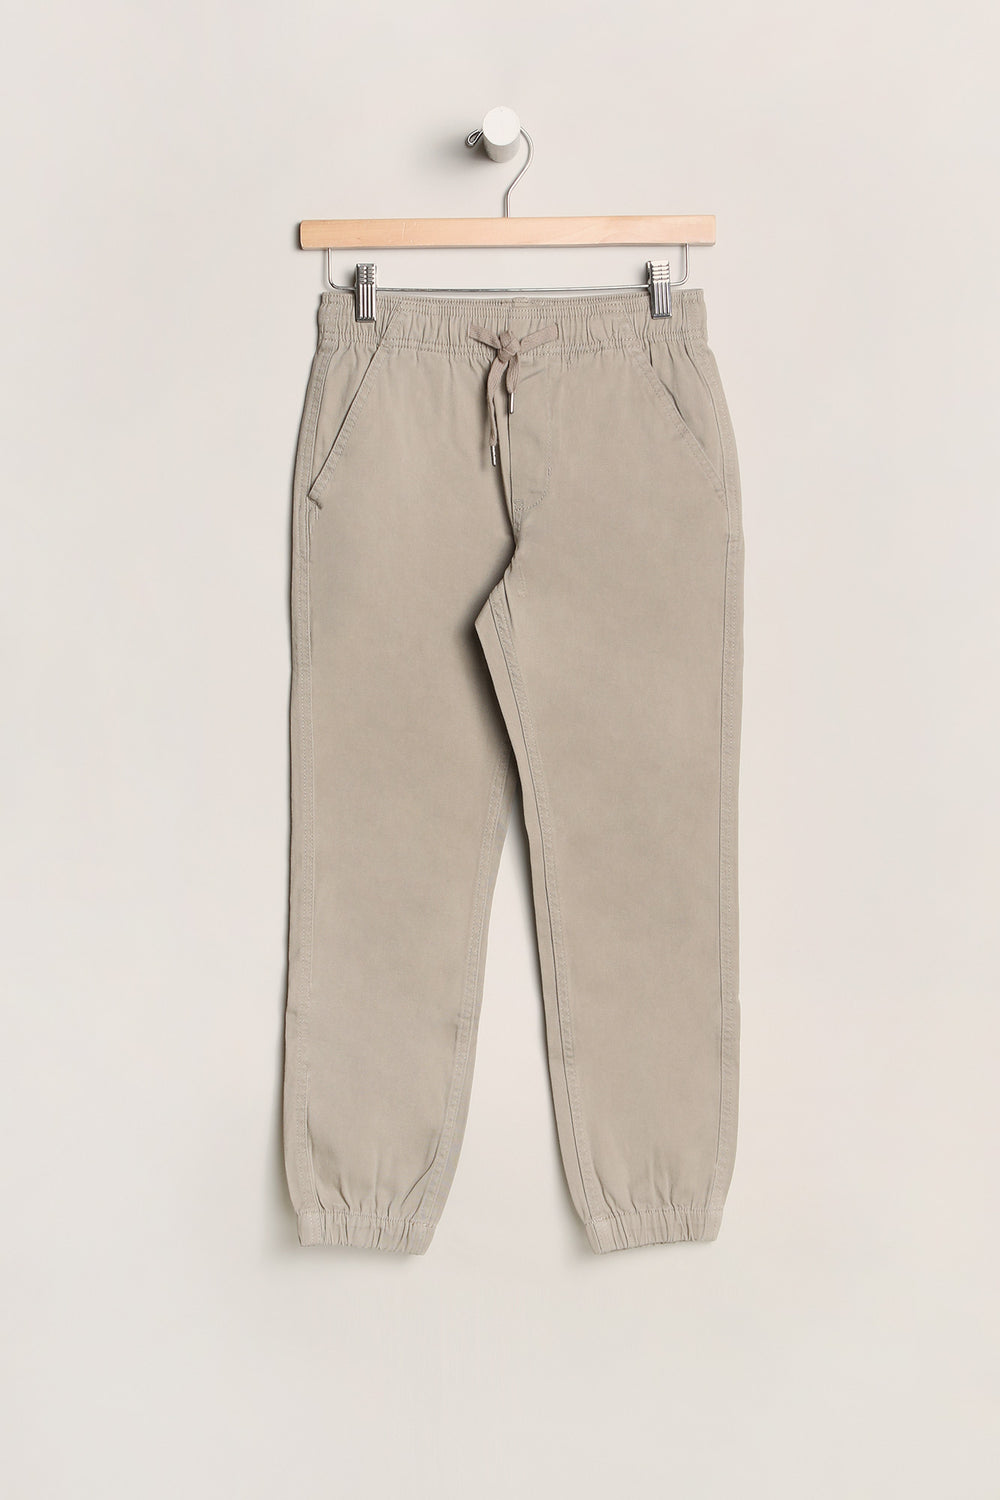 West49 Youth Slim Twill Jogger Sand